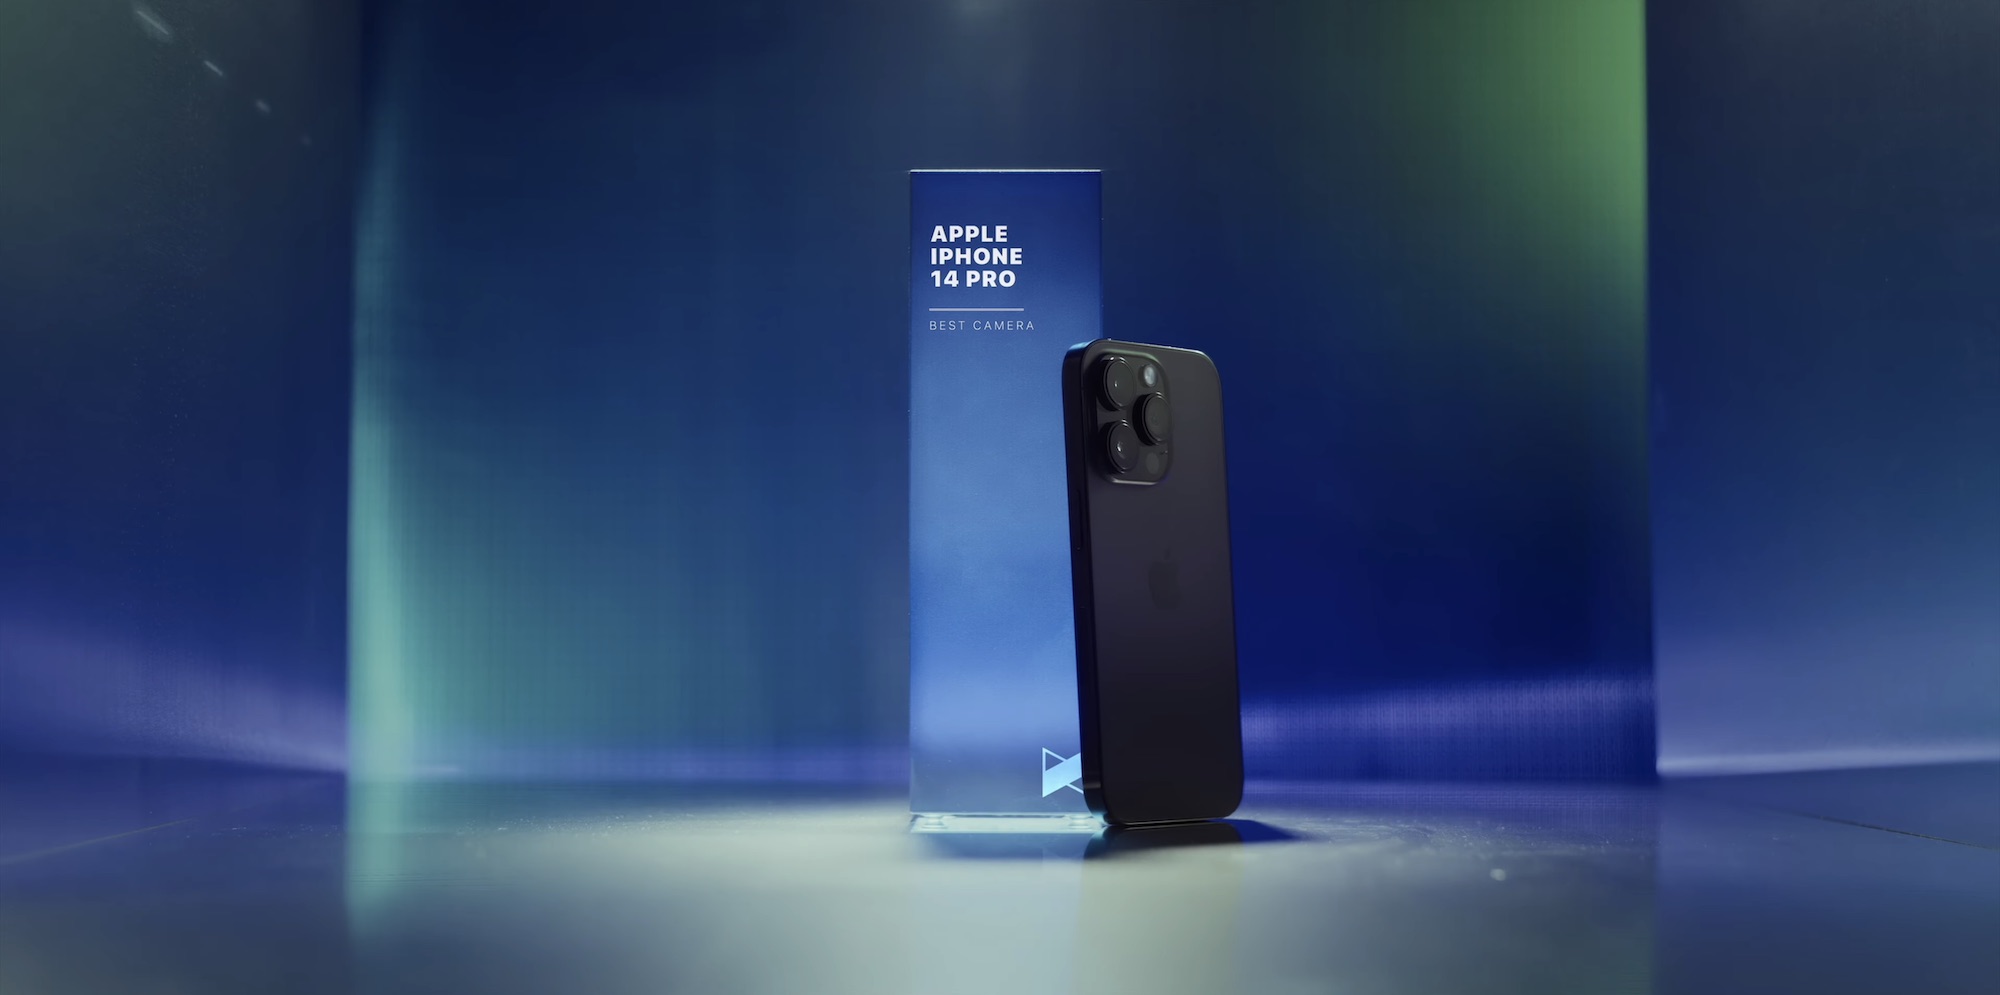 The iPhone loses prominence to its competitors in the MKBHD Smartphone Awards 2022